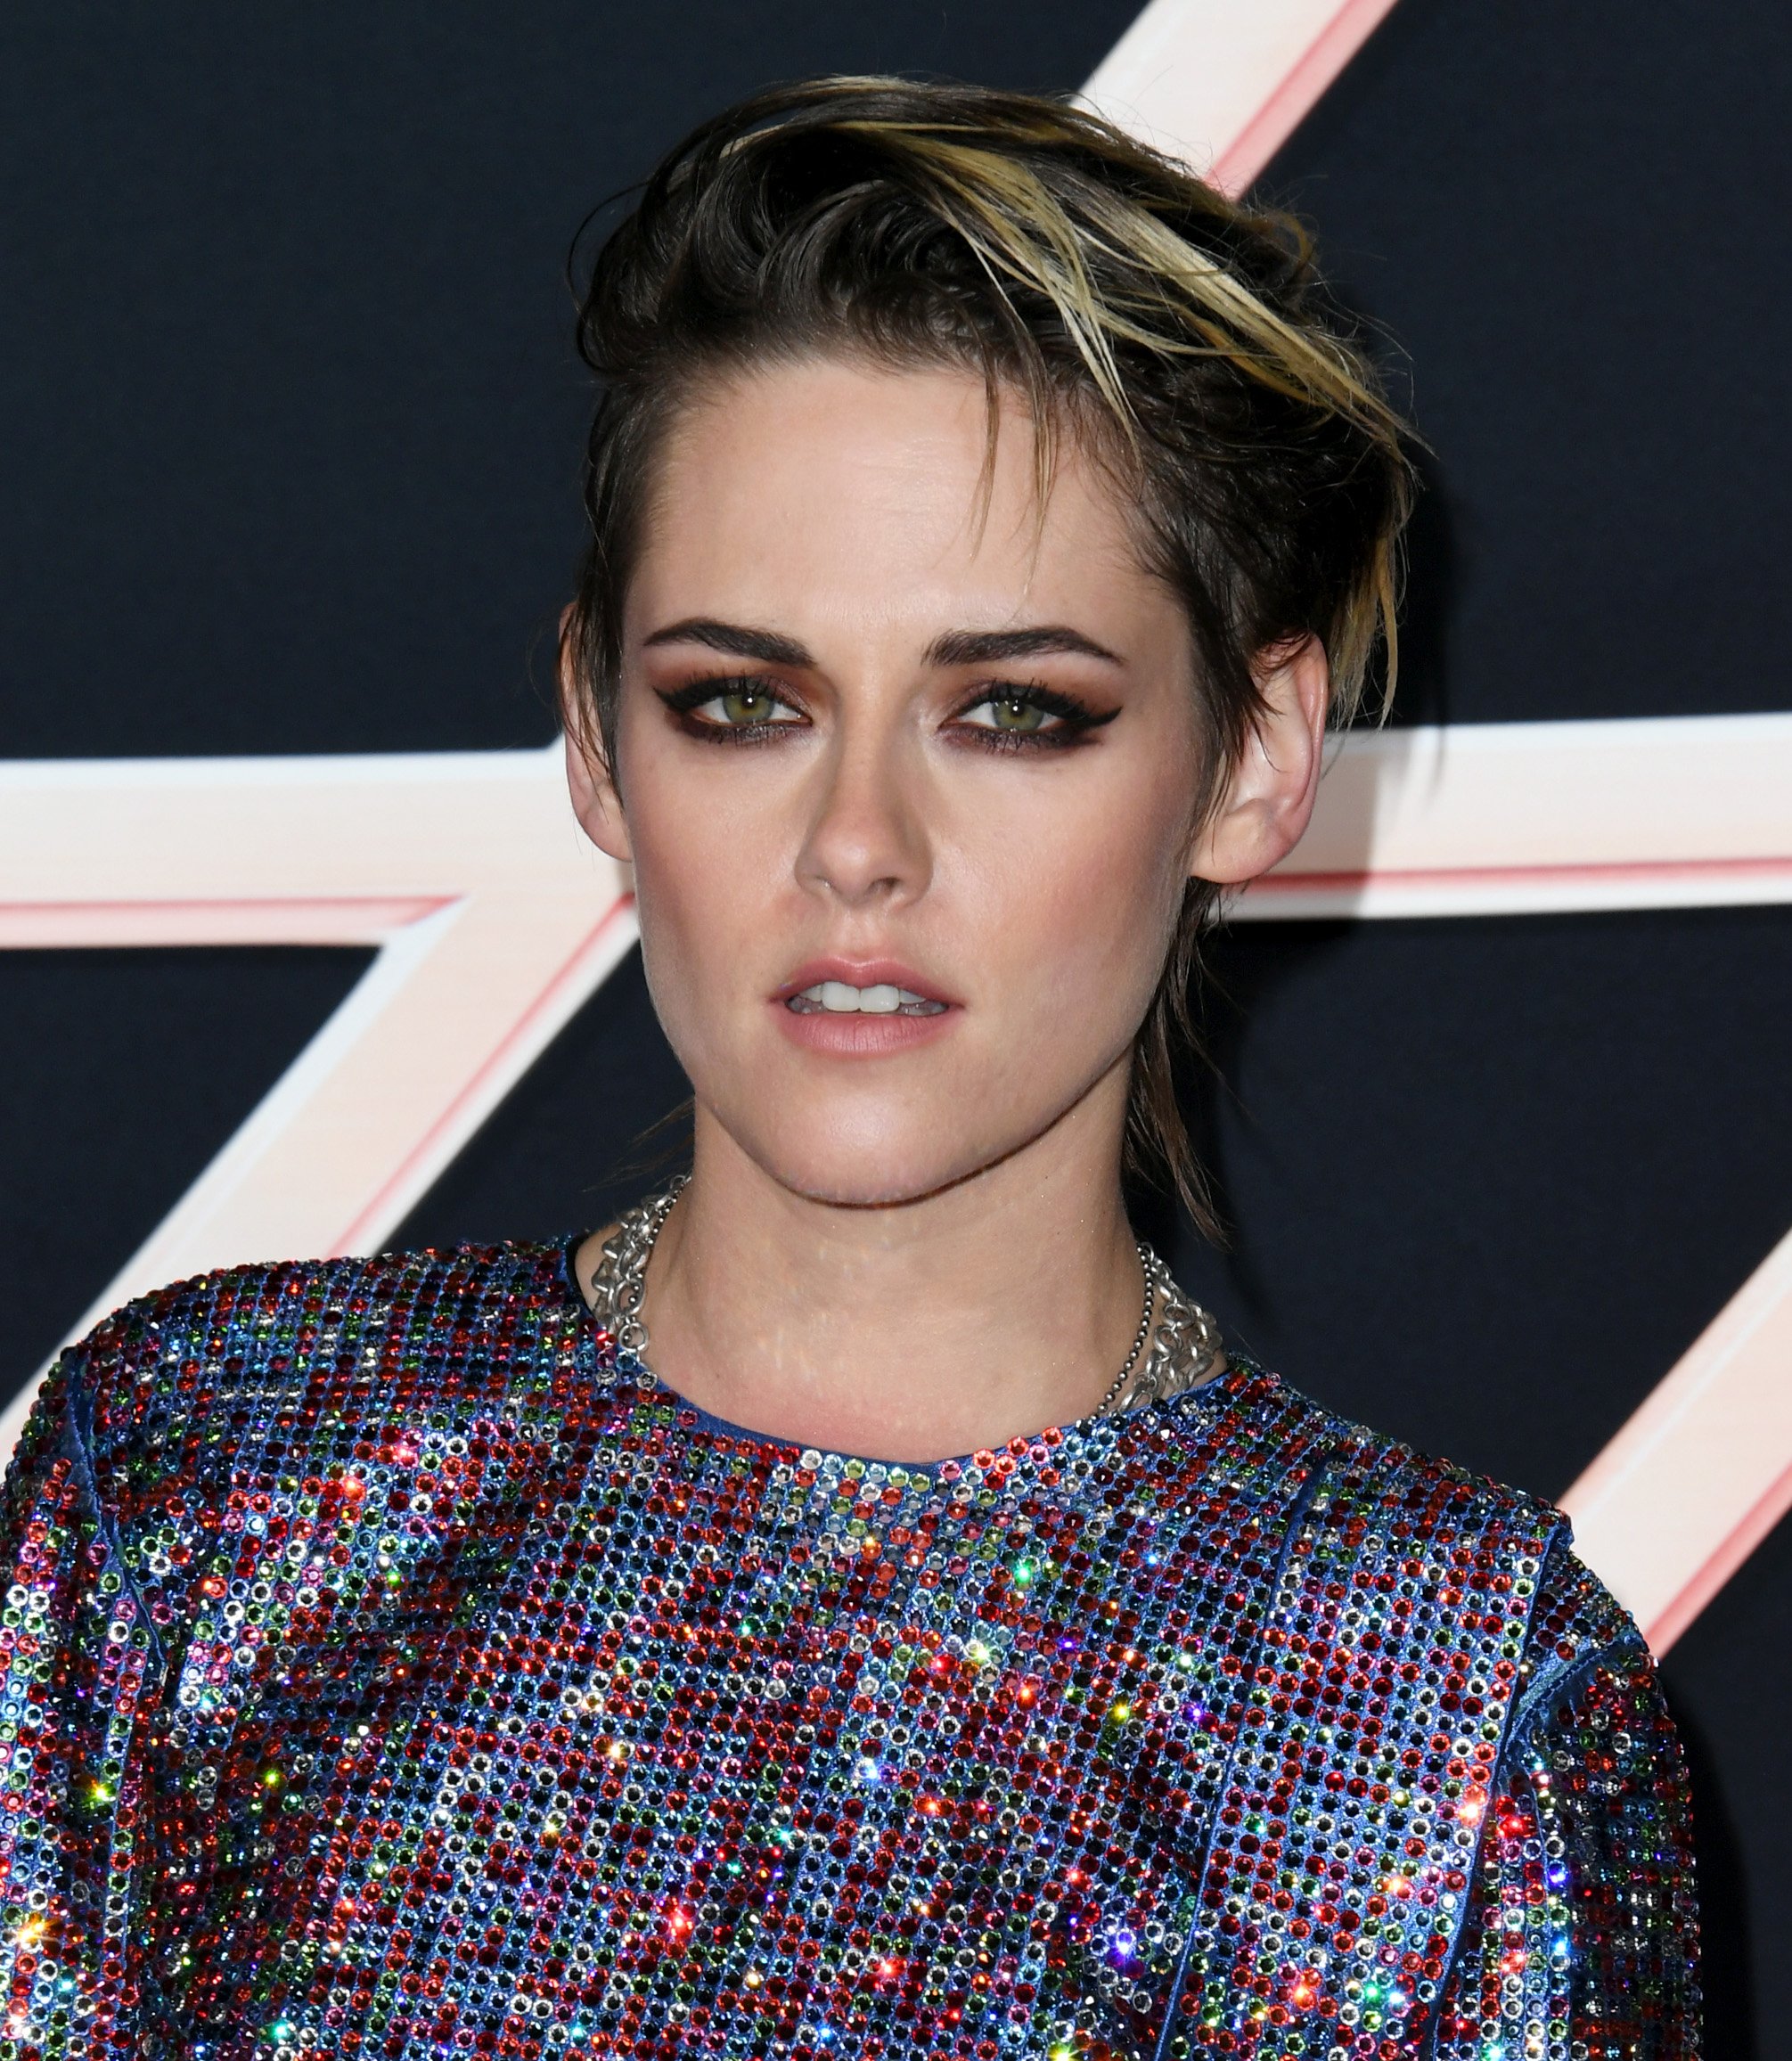 Kristen Stewart pictured at the premiere of  "Charlie's Angels," 2019, Hollywood, California. | Photo: Getty Images